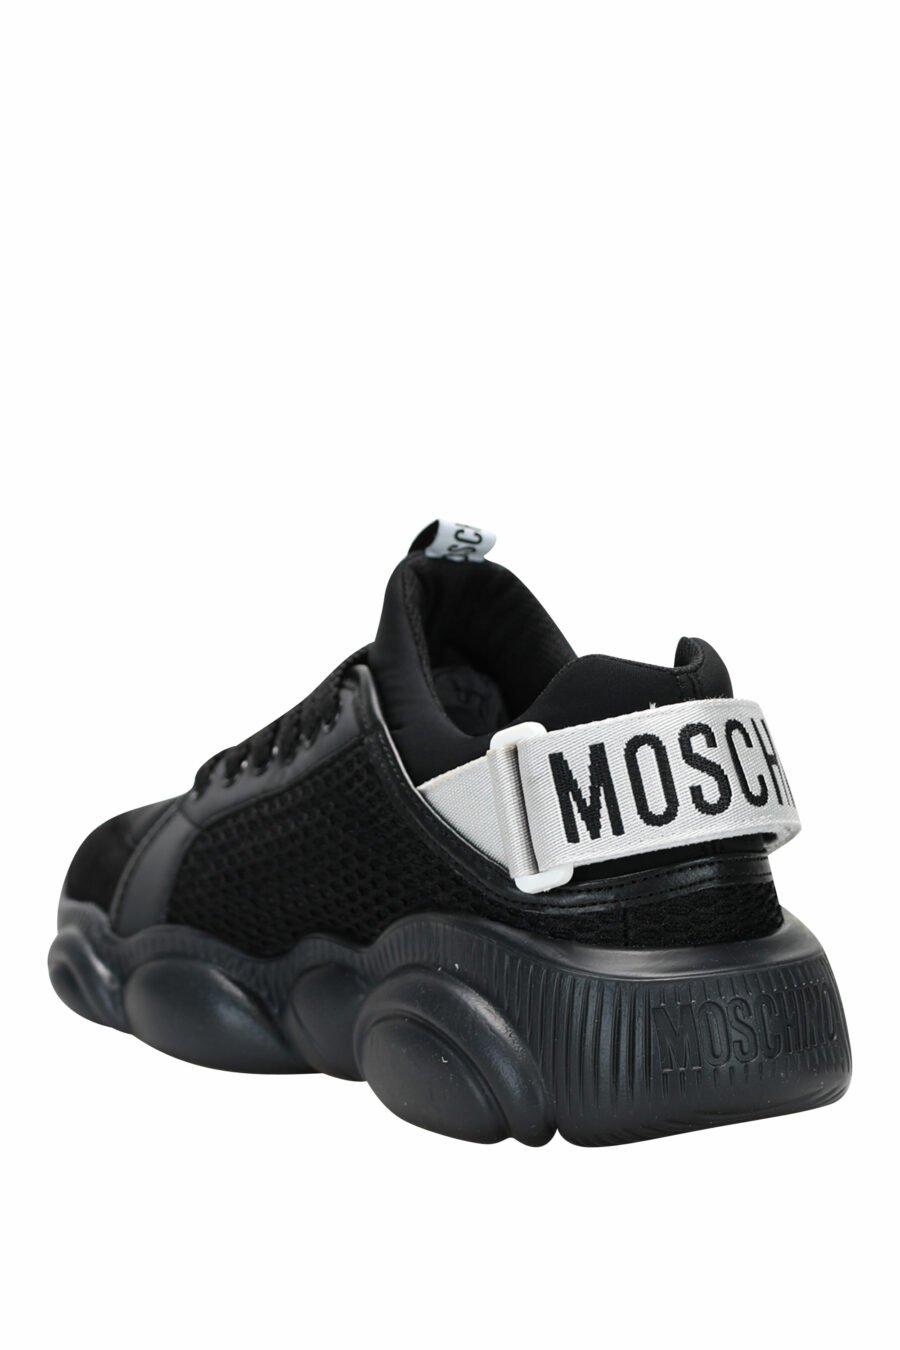 Black "teddy" trainers with black sole and white velcro logo - 8054653062856 3